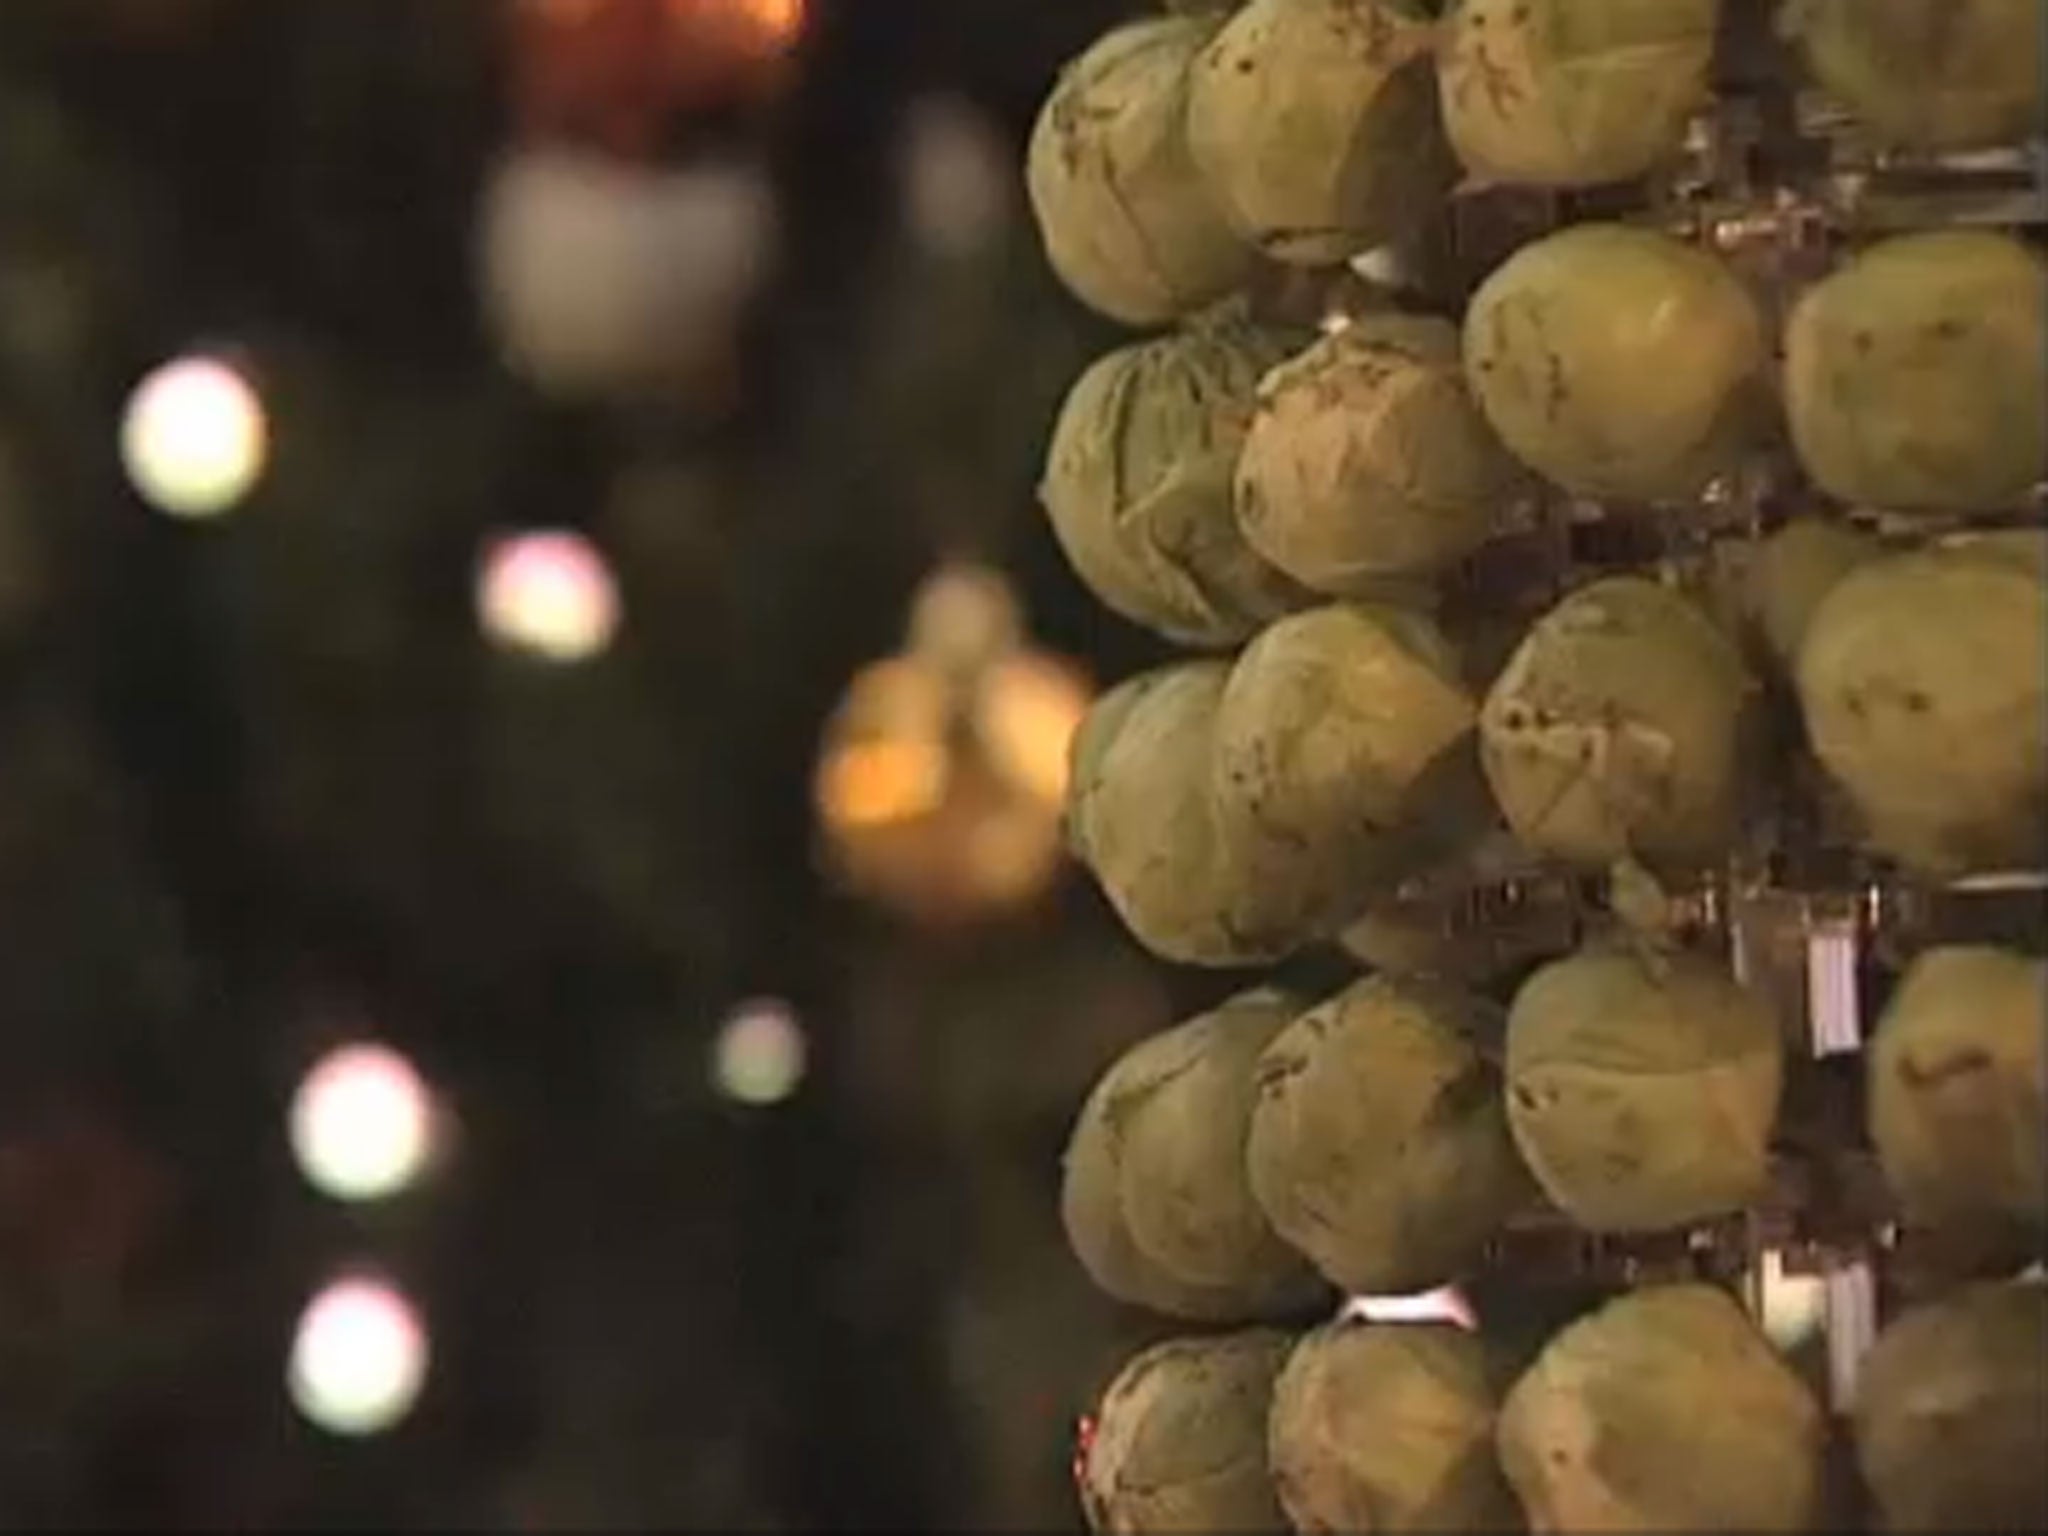 Scientists have created the world's first Brussels sprouts-powered Christmas tree